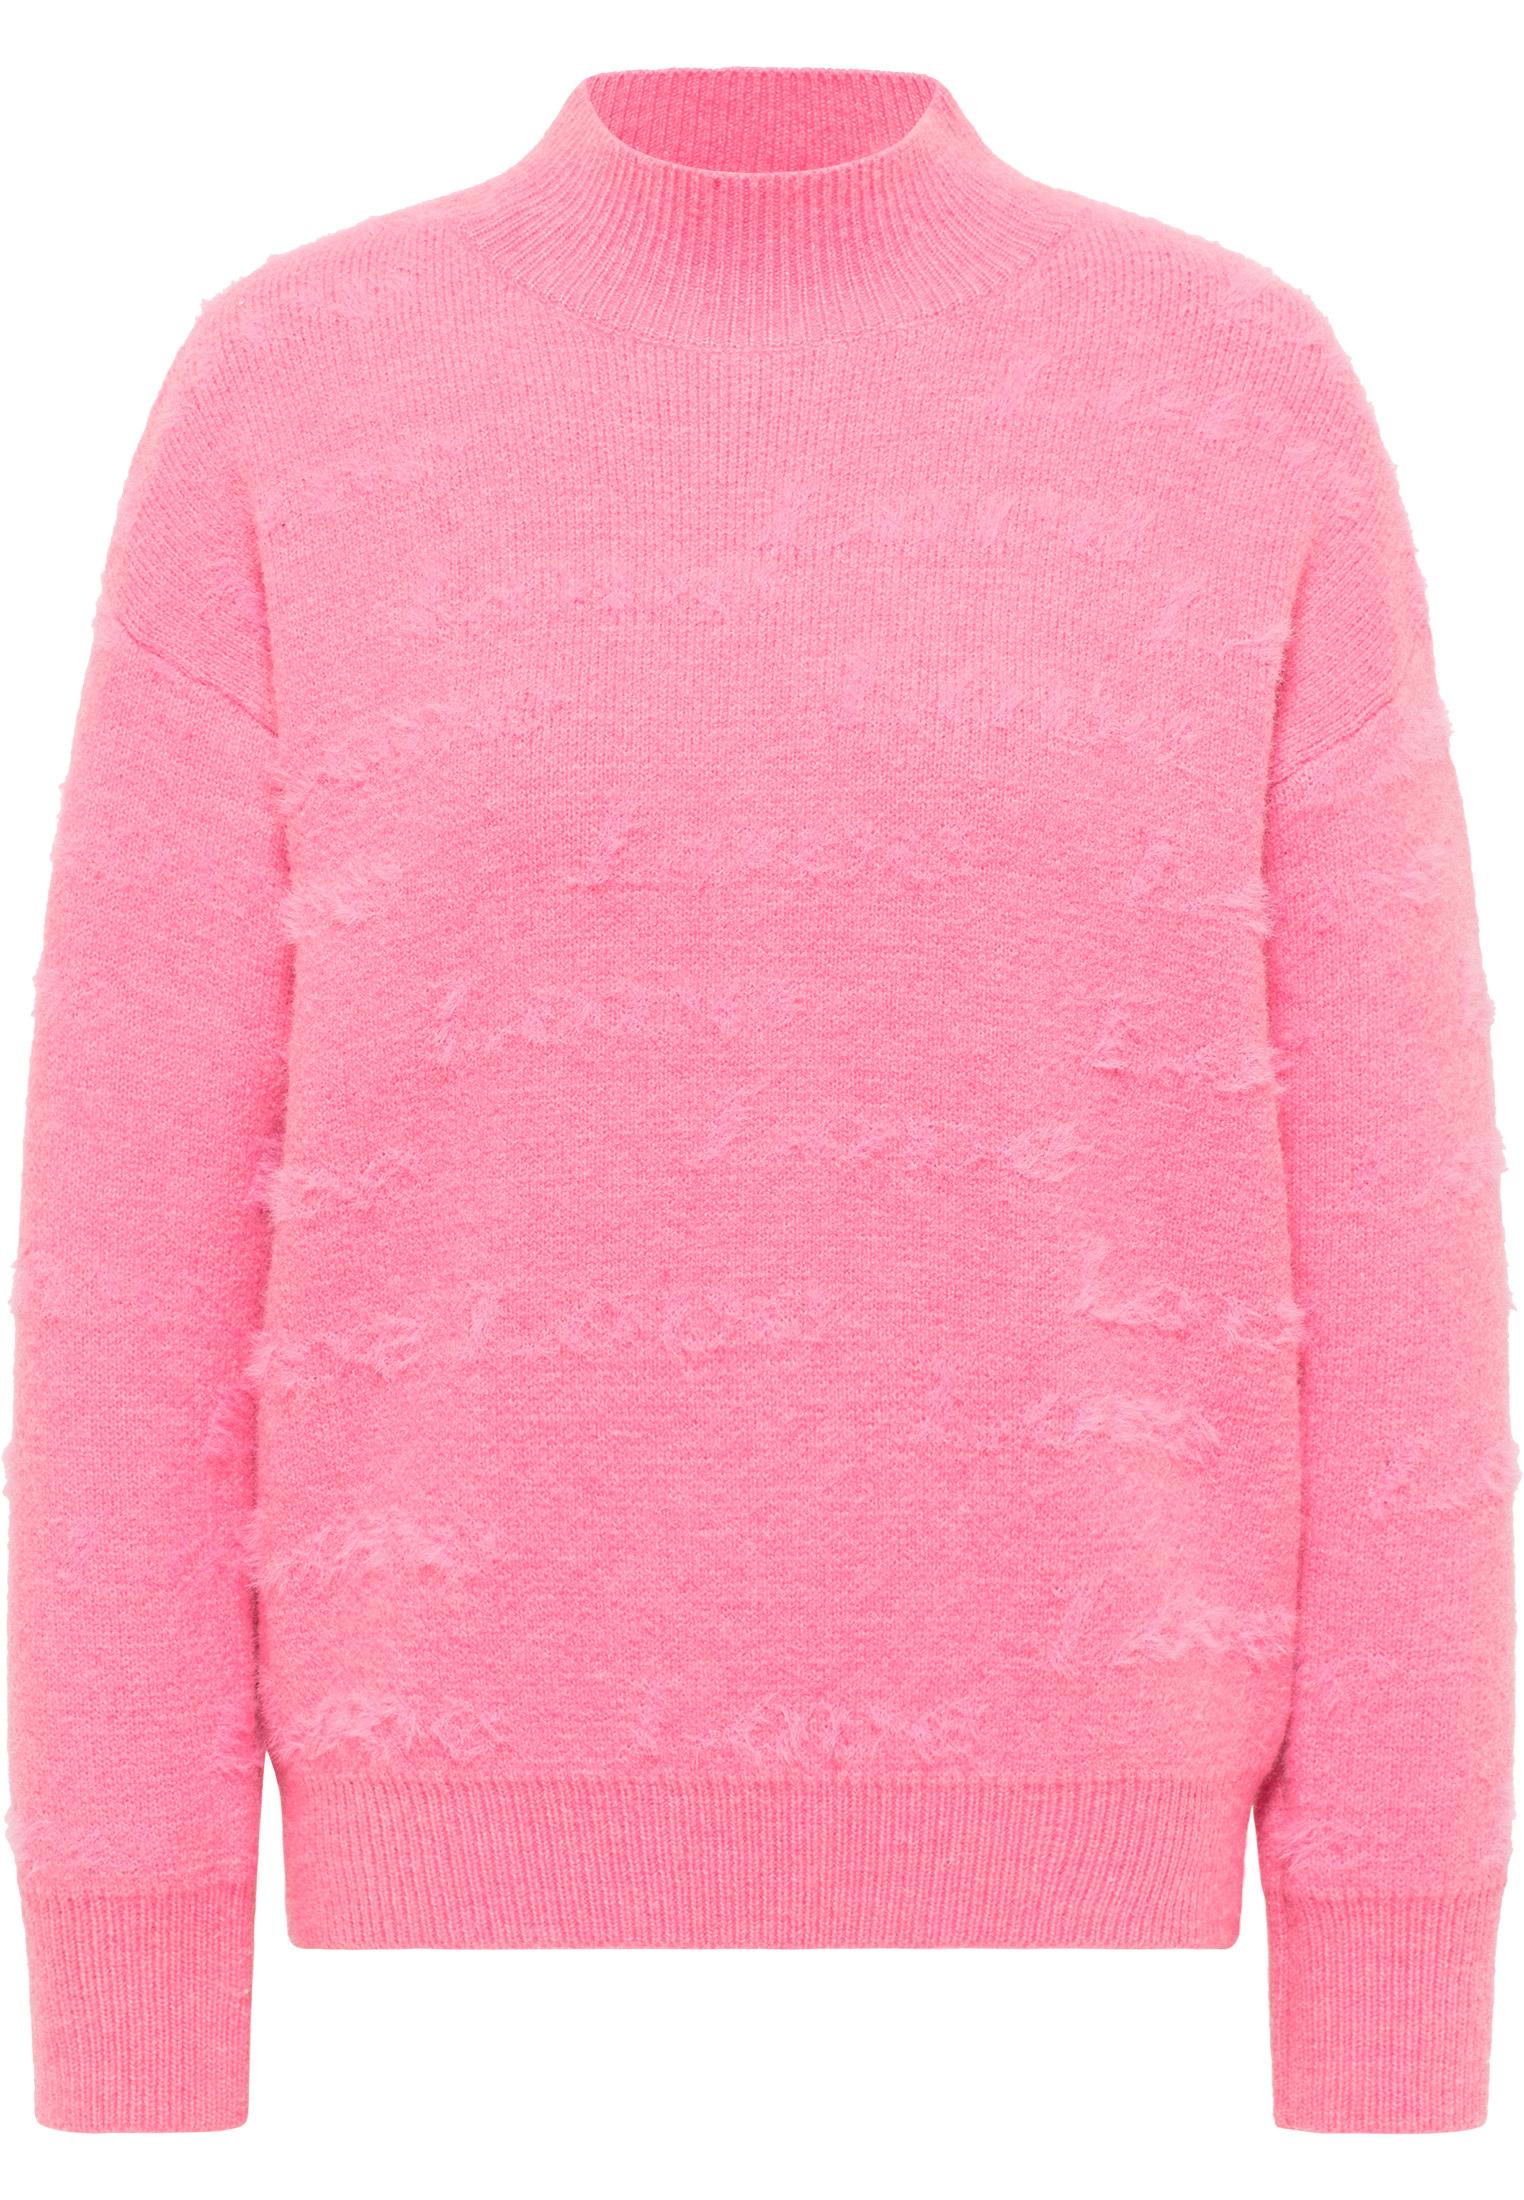 Donna ihRl7 MYMO Pullover extra large in Rosa Chiaro 